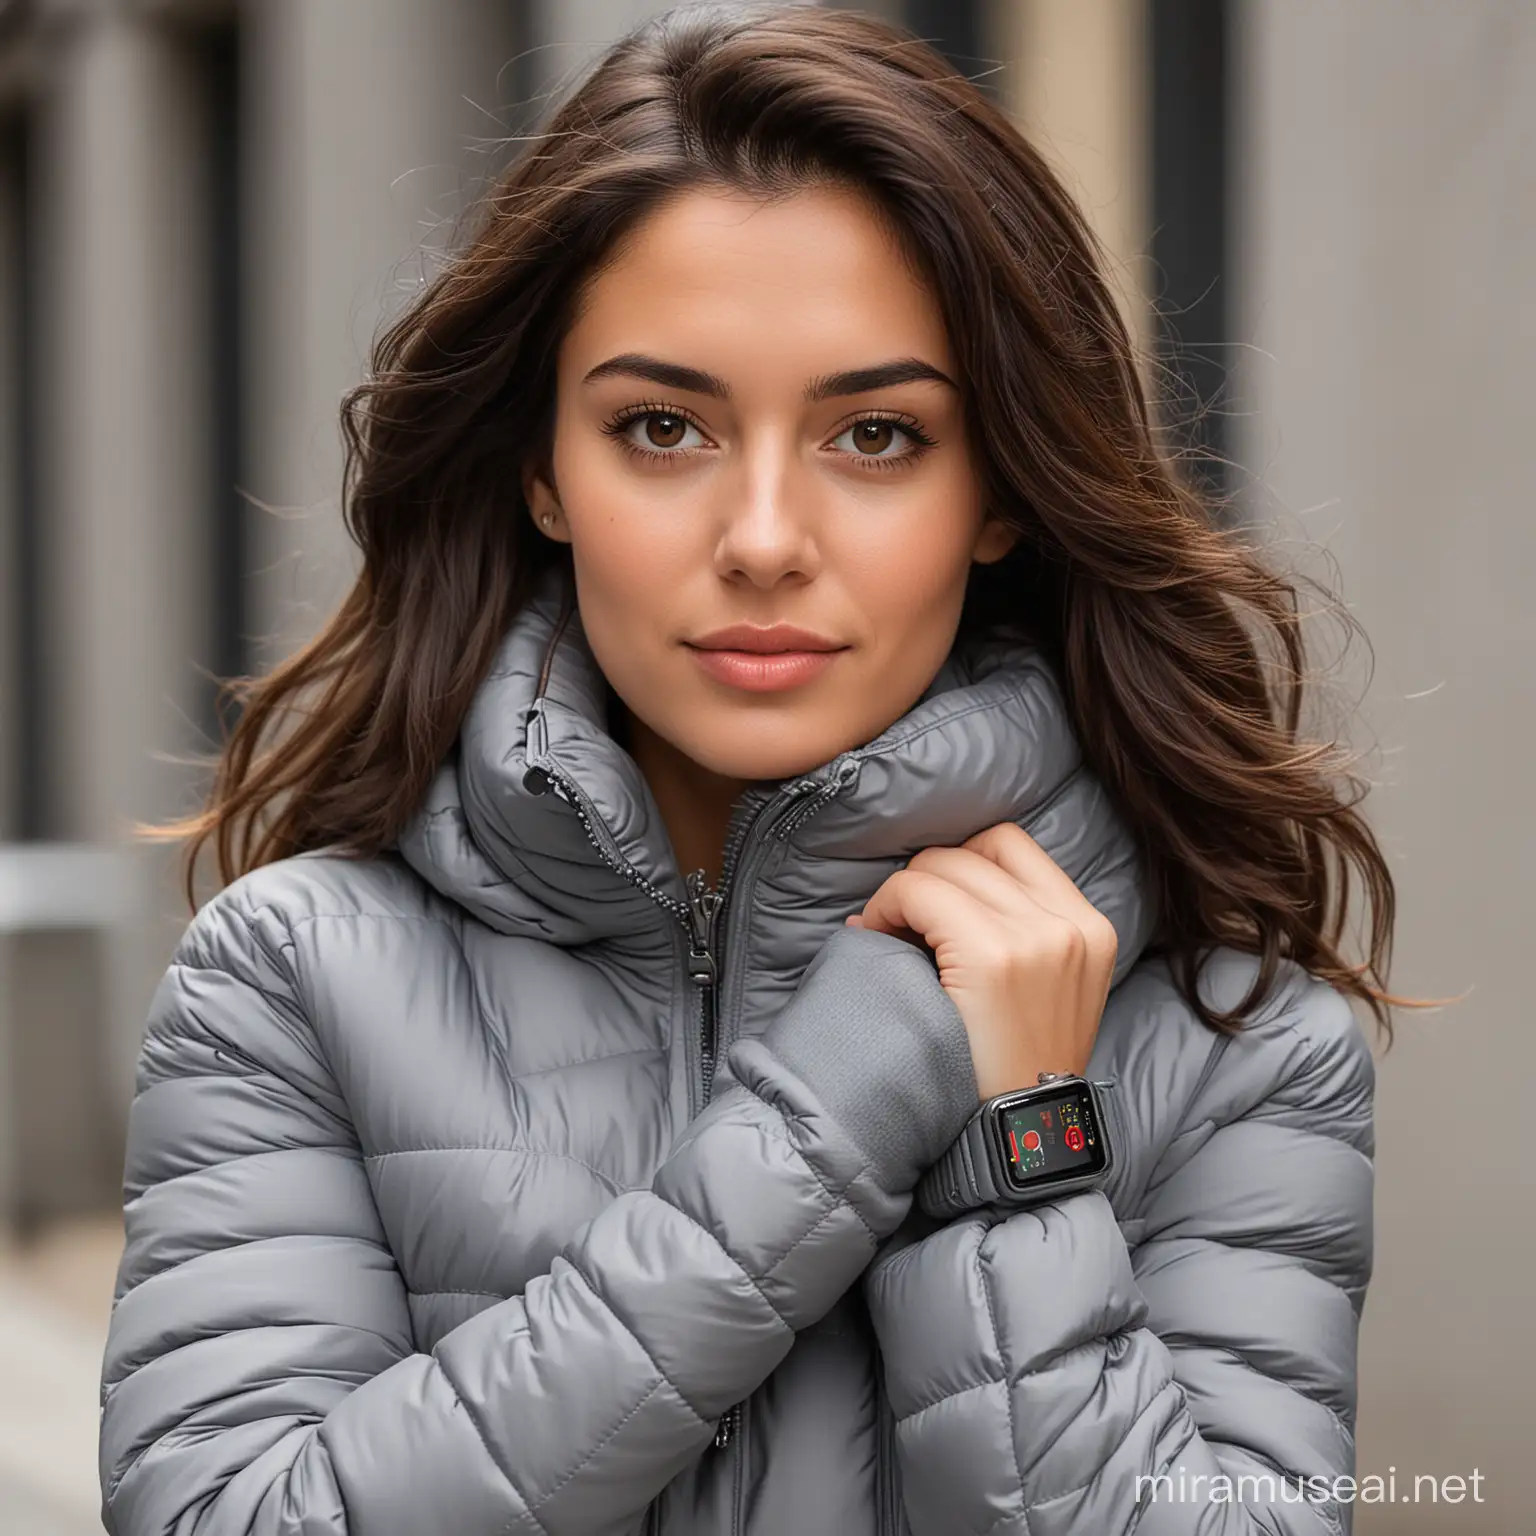 Beautiful 27 year old woman with dark brown hair and brown eyes wearing a gray puffer coat and an Apple Watch